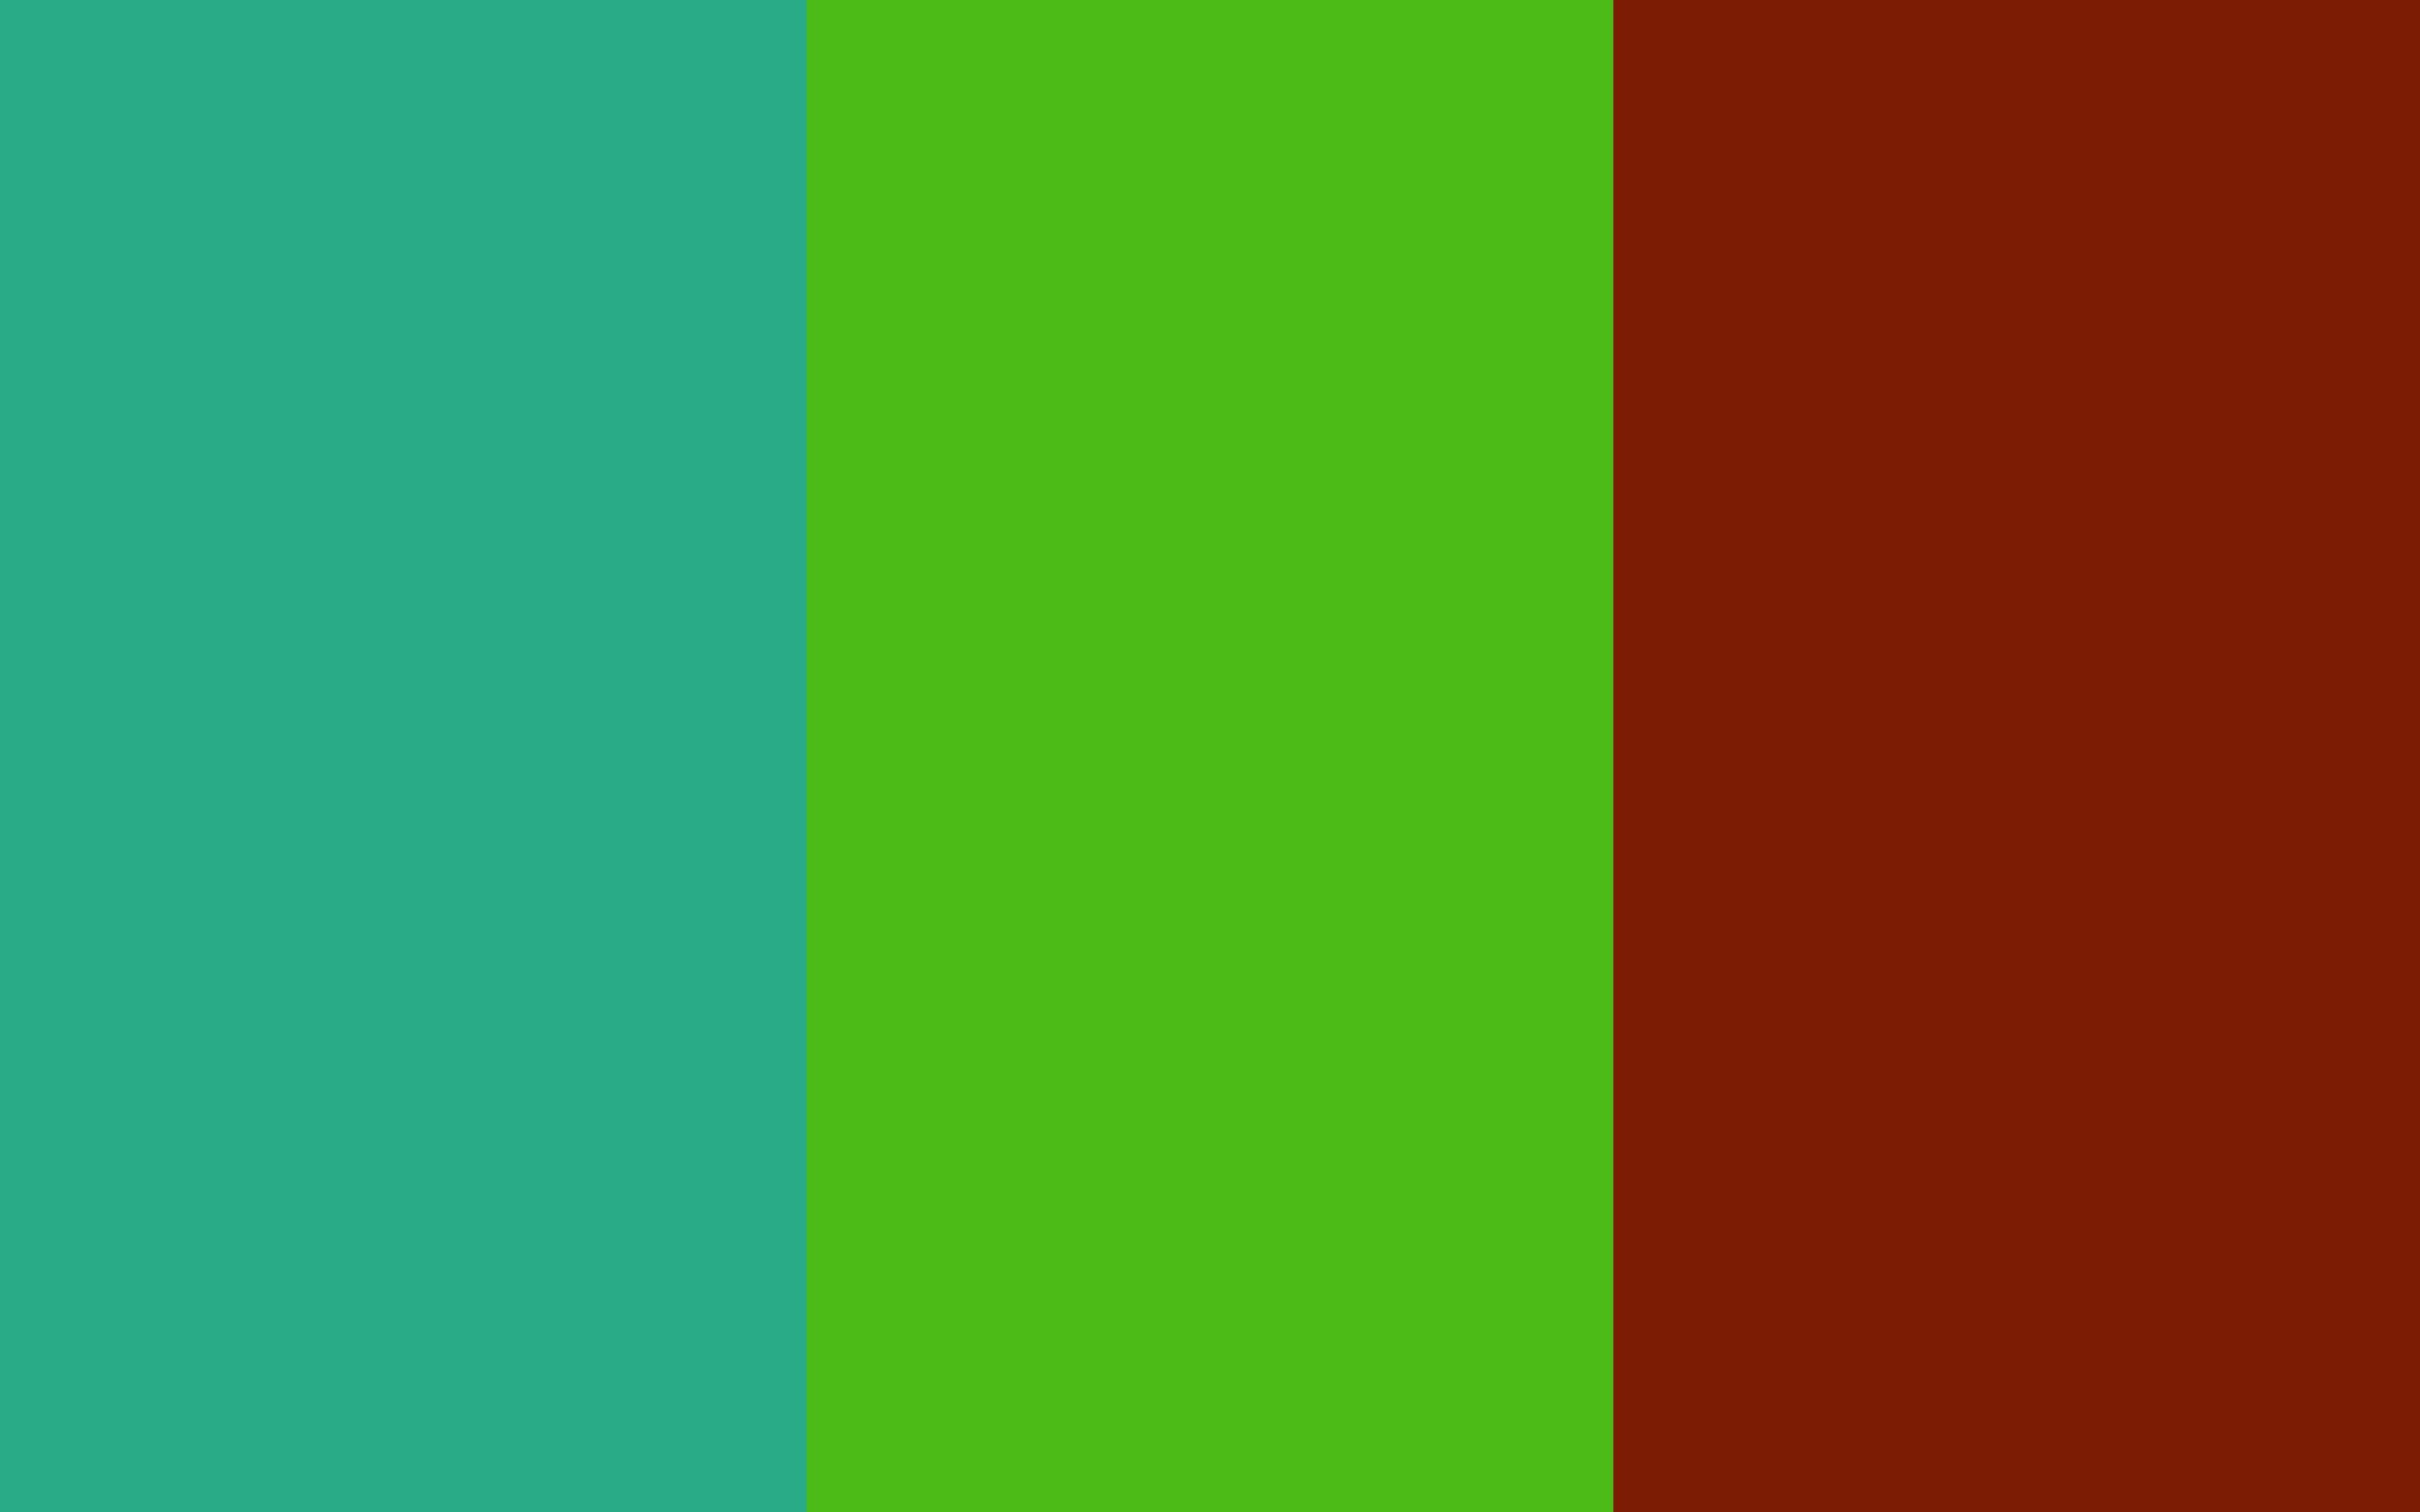 Free 2880x1800 resolution Jungle Green Kelly Green and Kenyan Copper